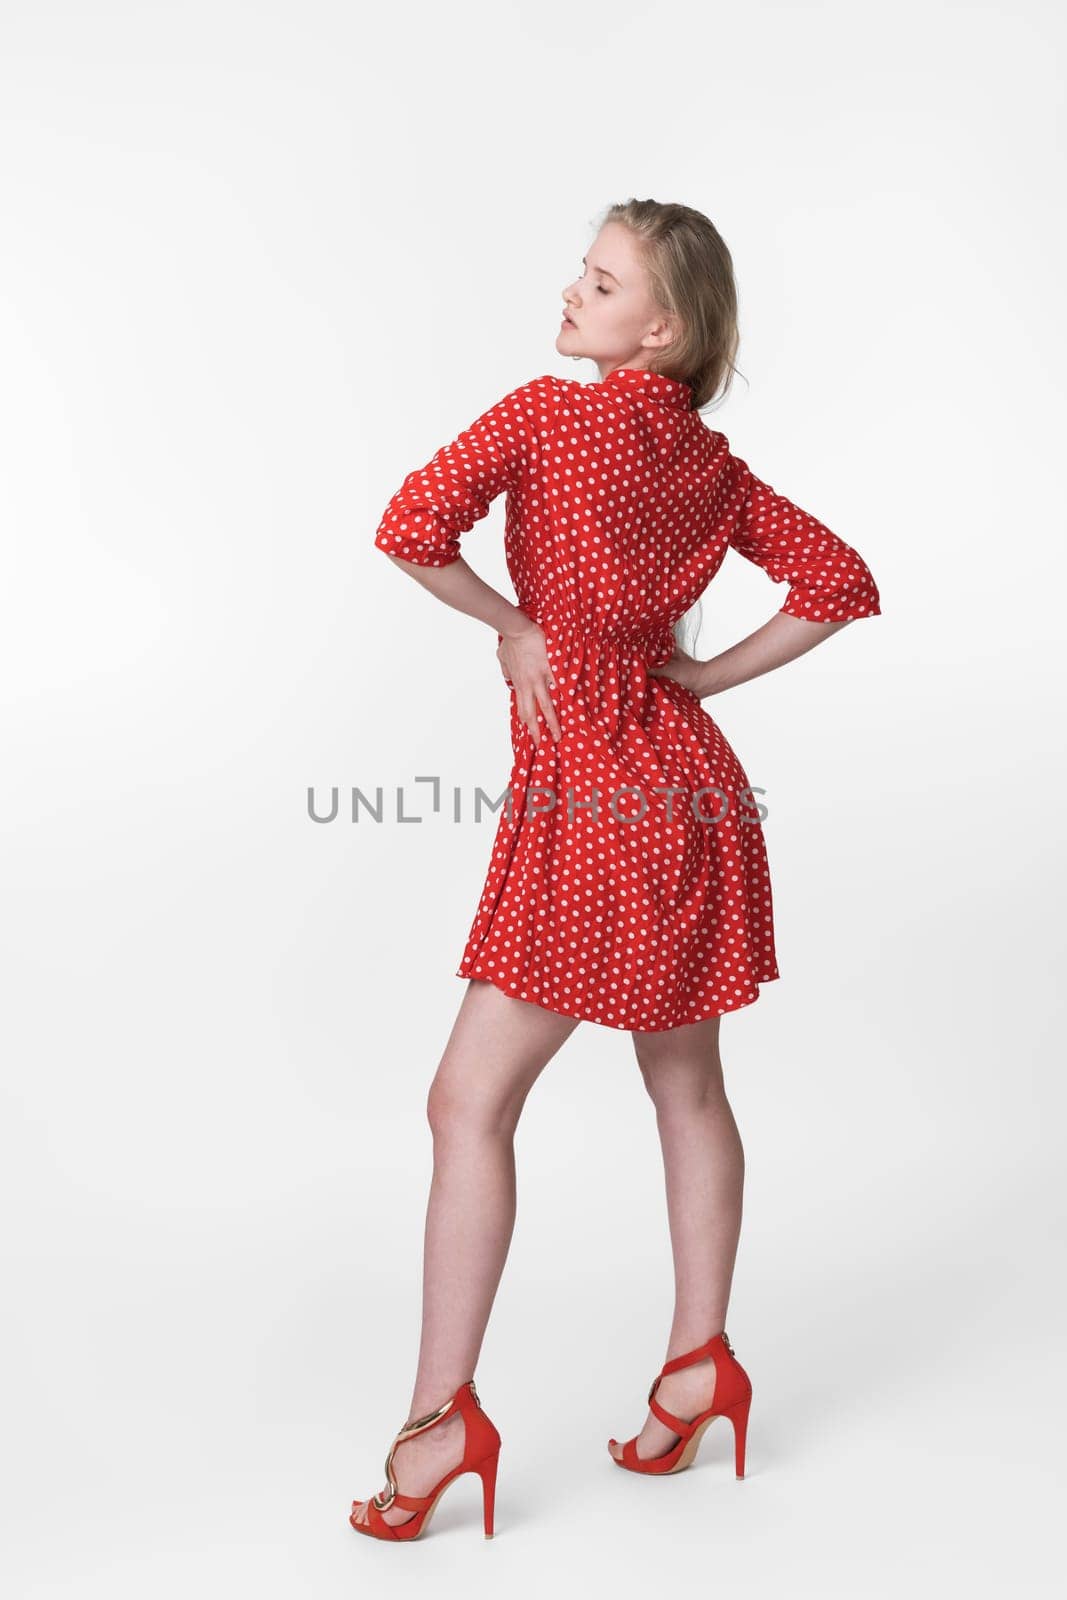 Cheerful blonde woman with closed eyes dressed in summer red polka dot dress on white background by Alexander-Piragis